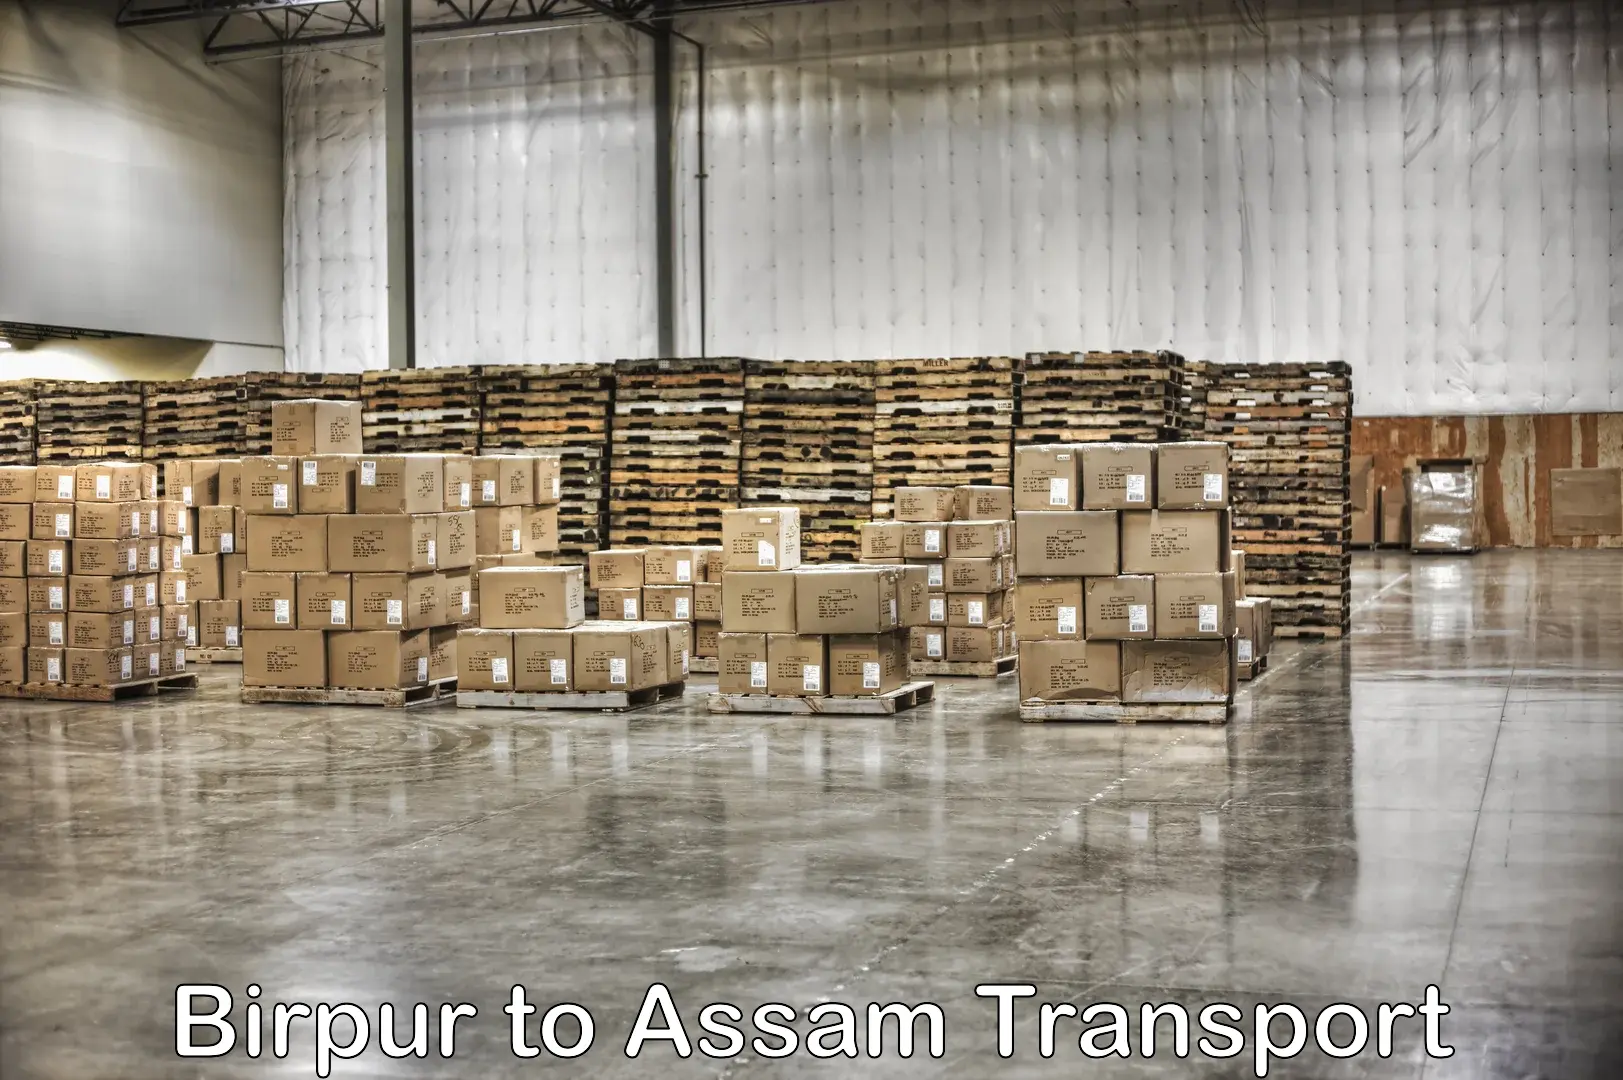 Container transportation services Birpur to Lala Assam